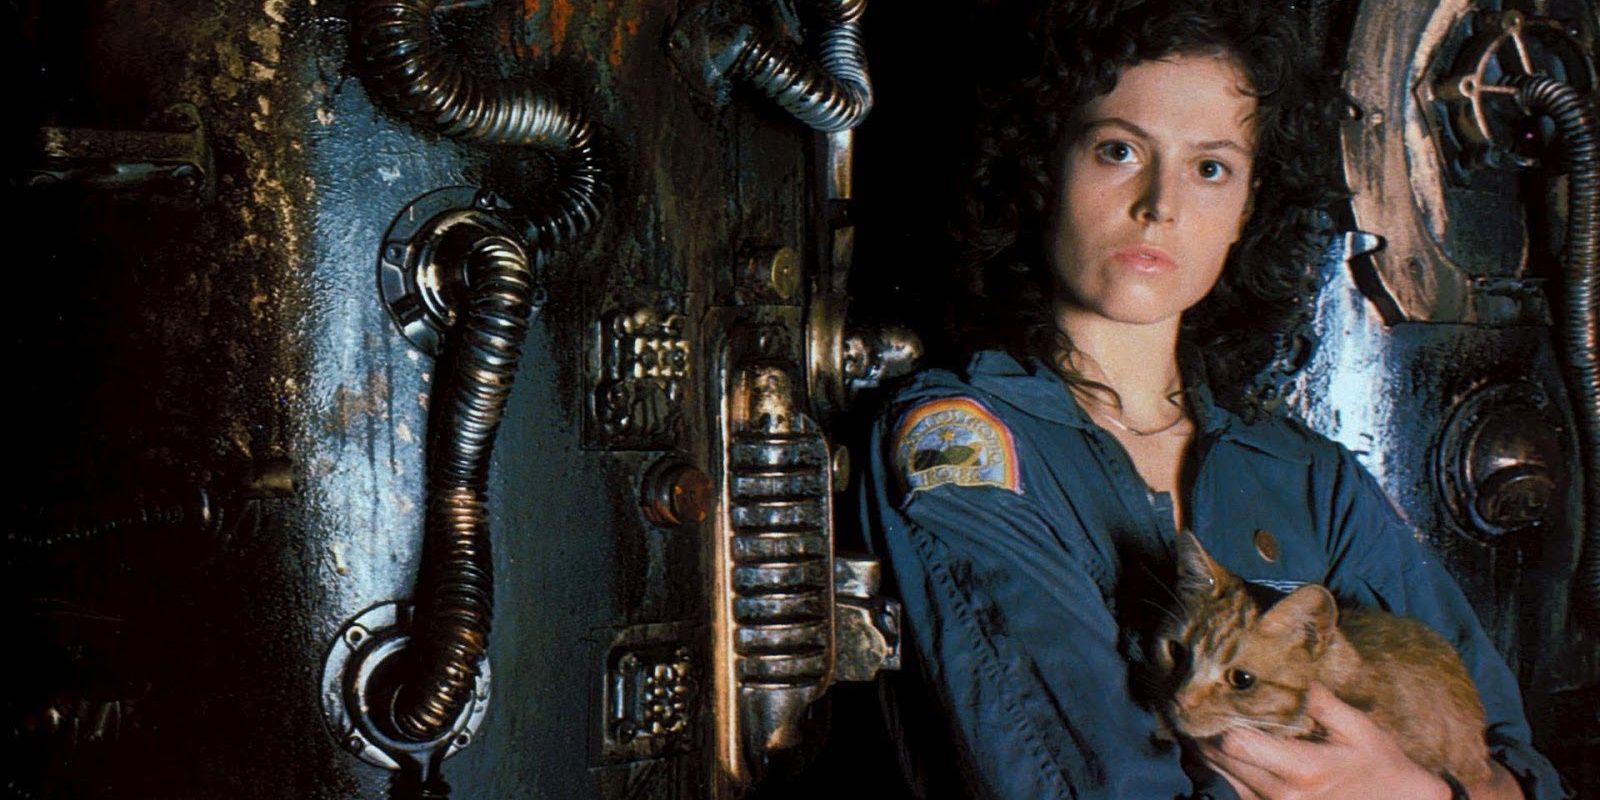 Ripley holding a cat while aboard the ship